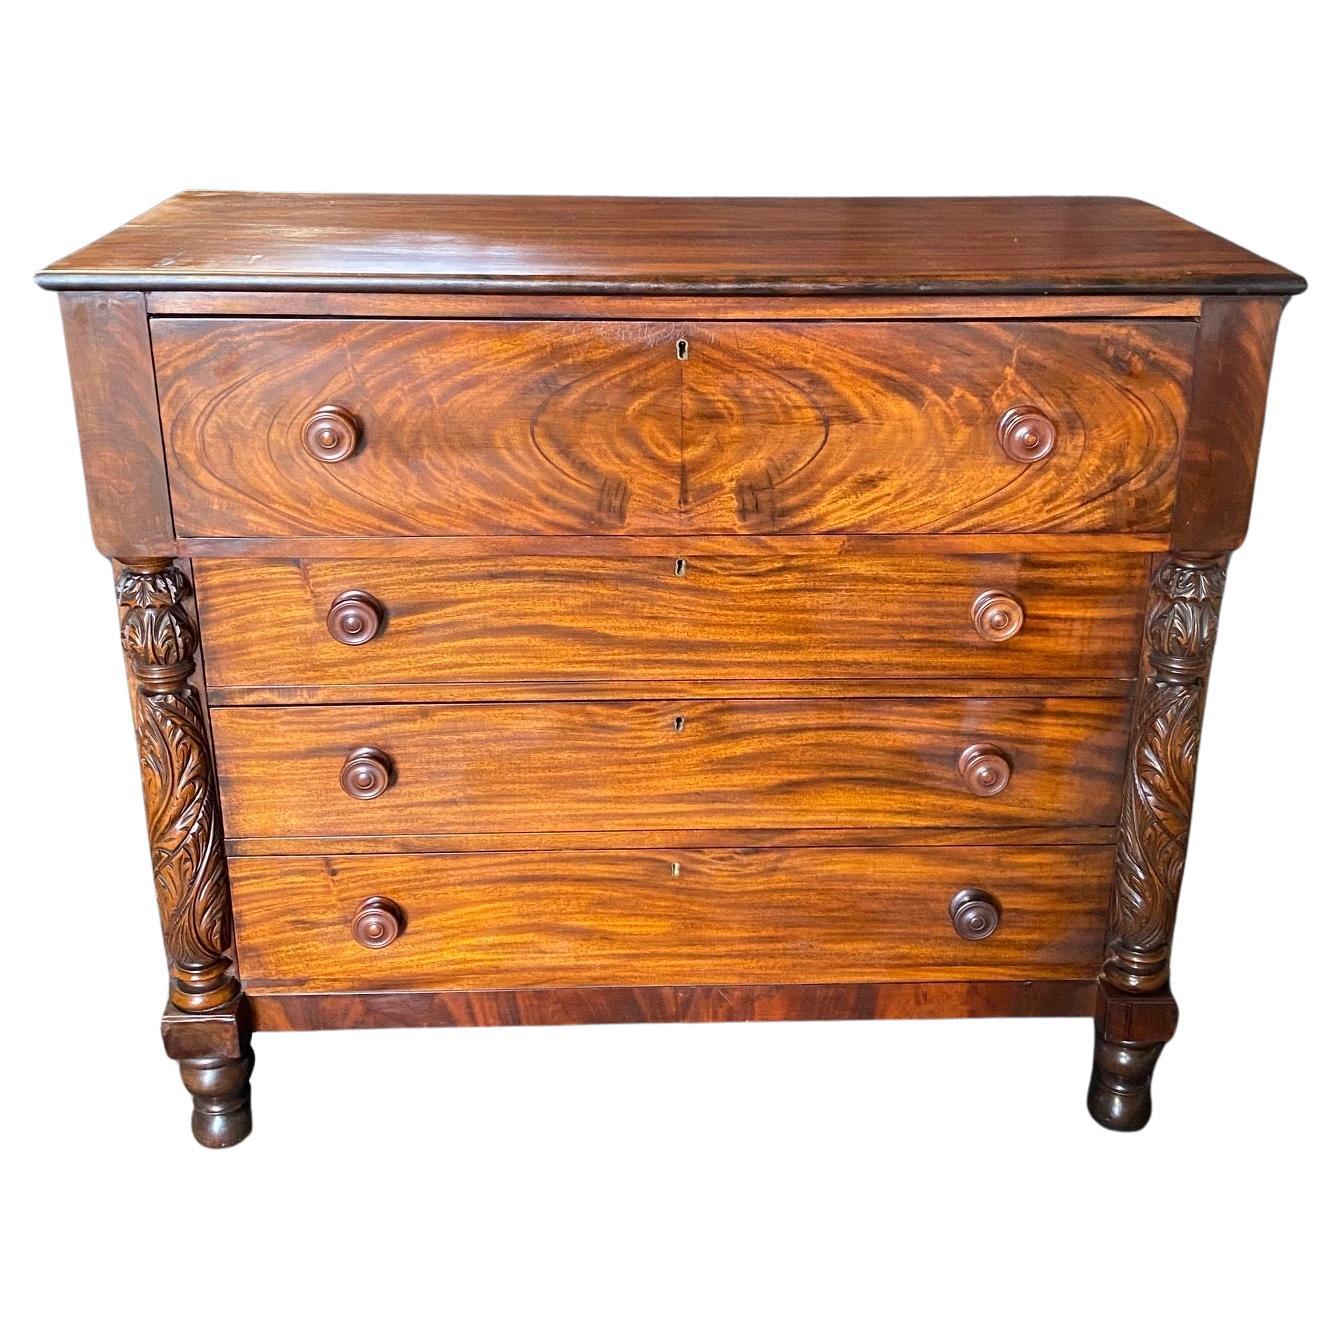  Early American Federal Chest of Drawers in Bookmatched Mahogany For Sale